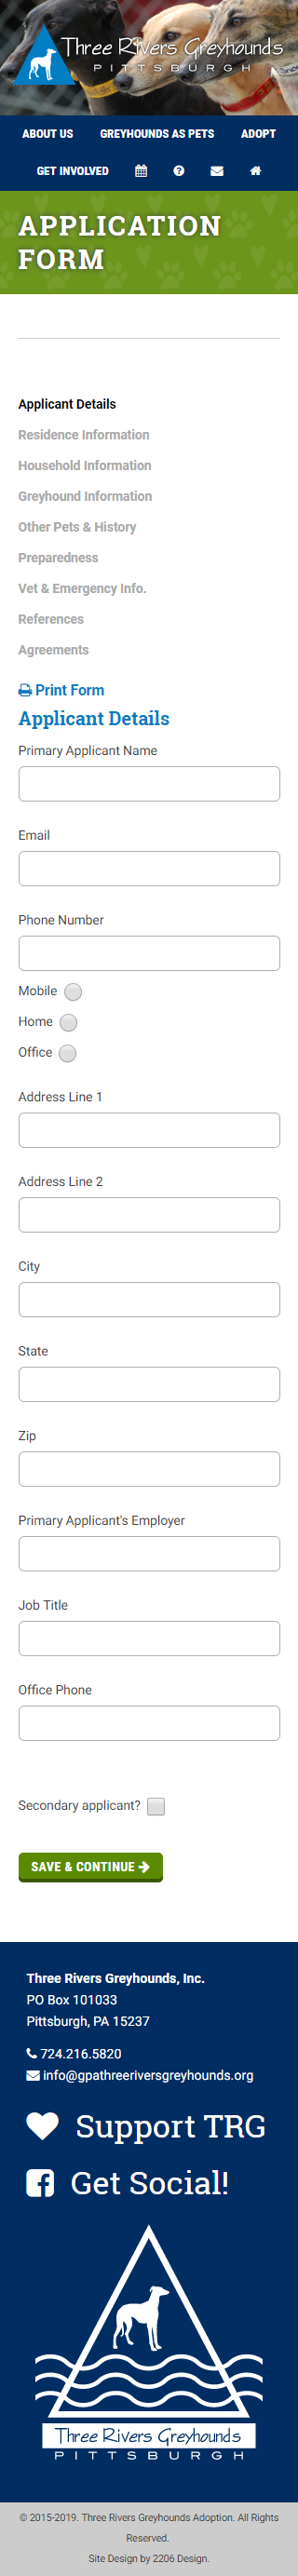 Adoption form using local storage to save sessions